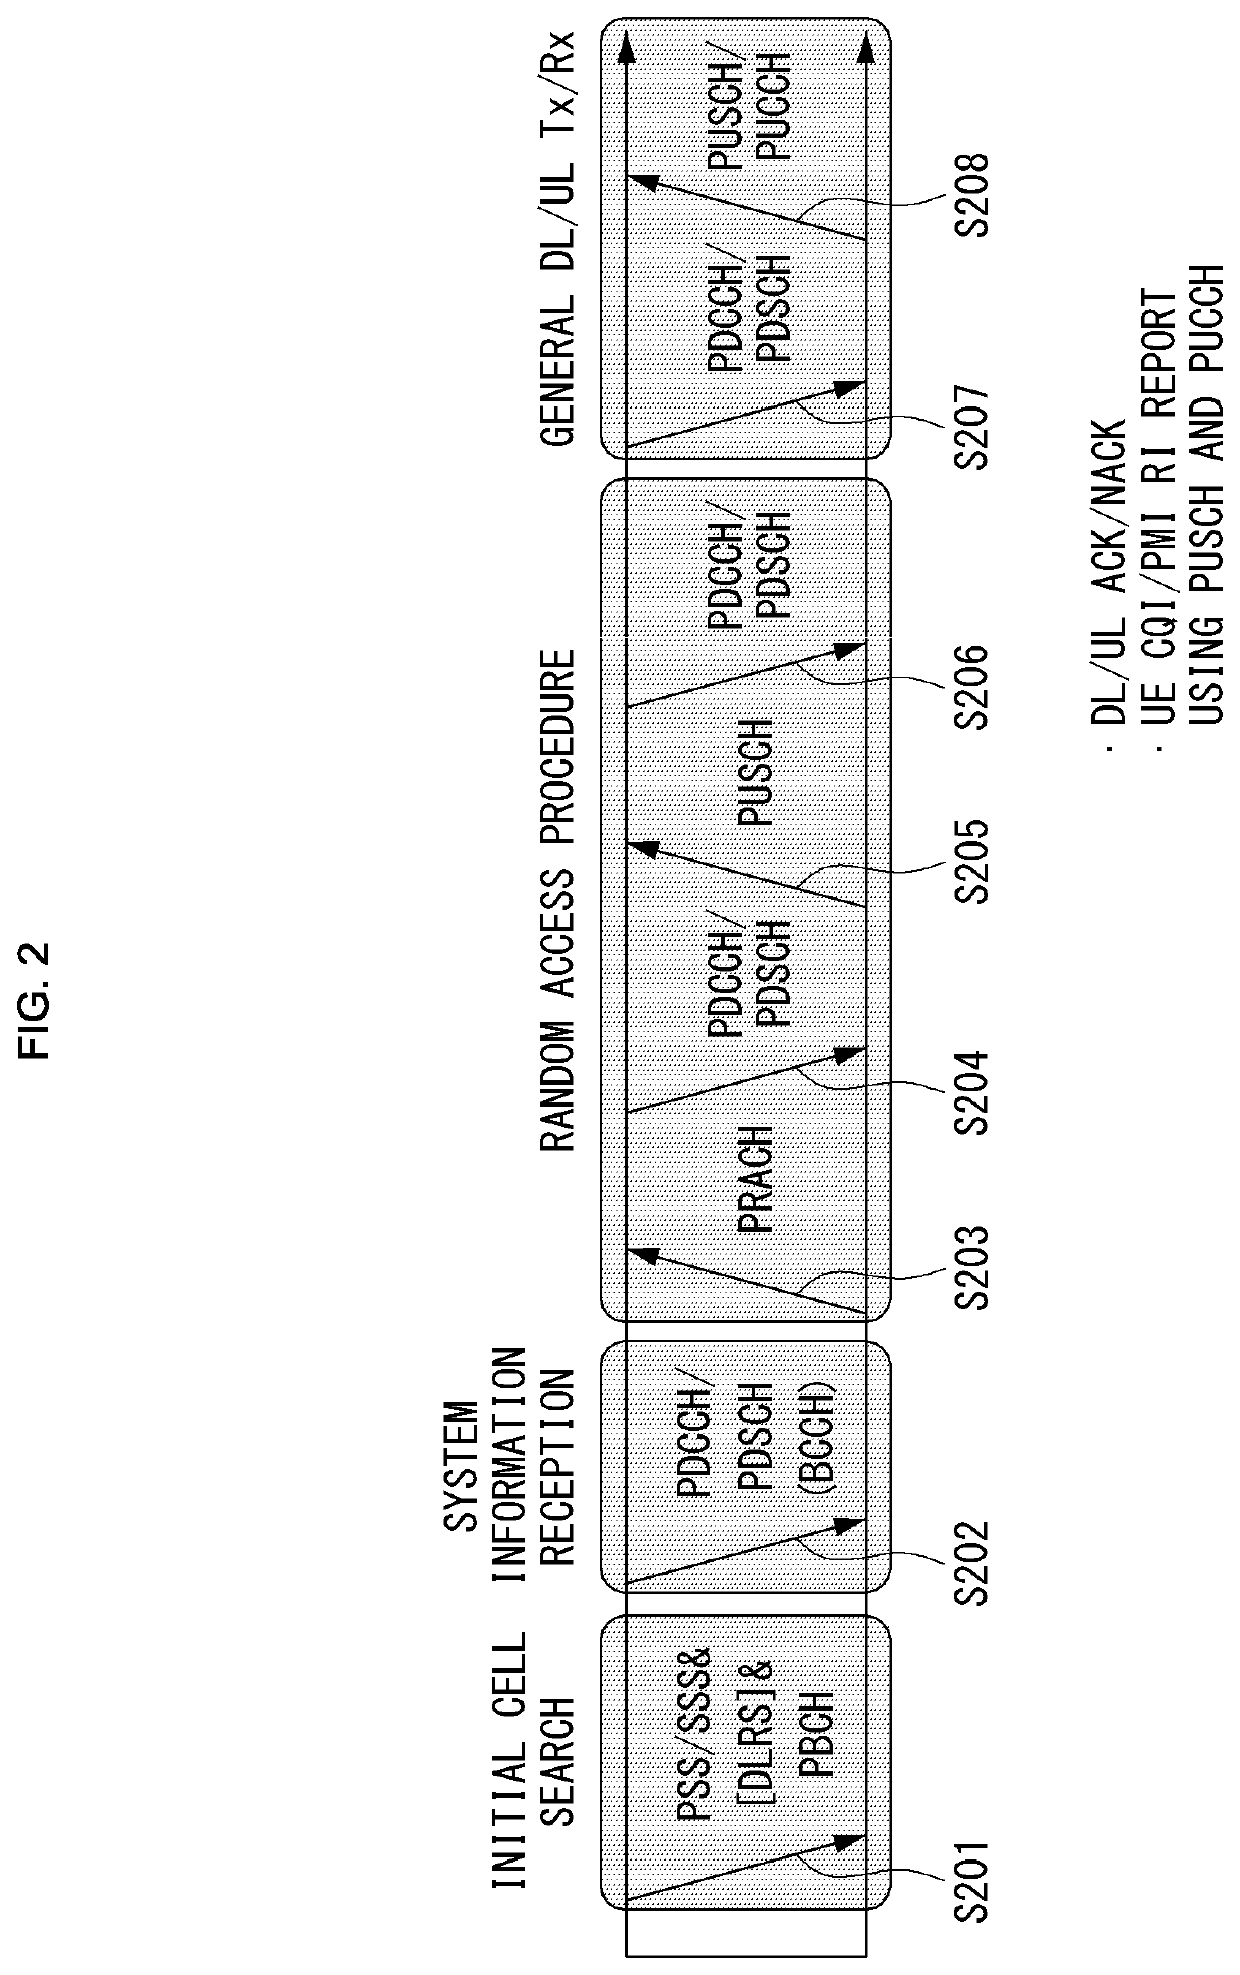 Method and apparatus for controlling a vehicle performing platooning in an autonomous driving system